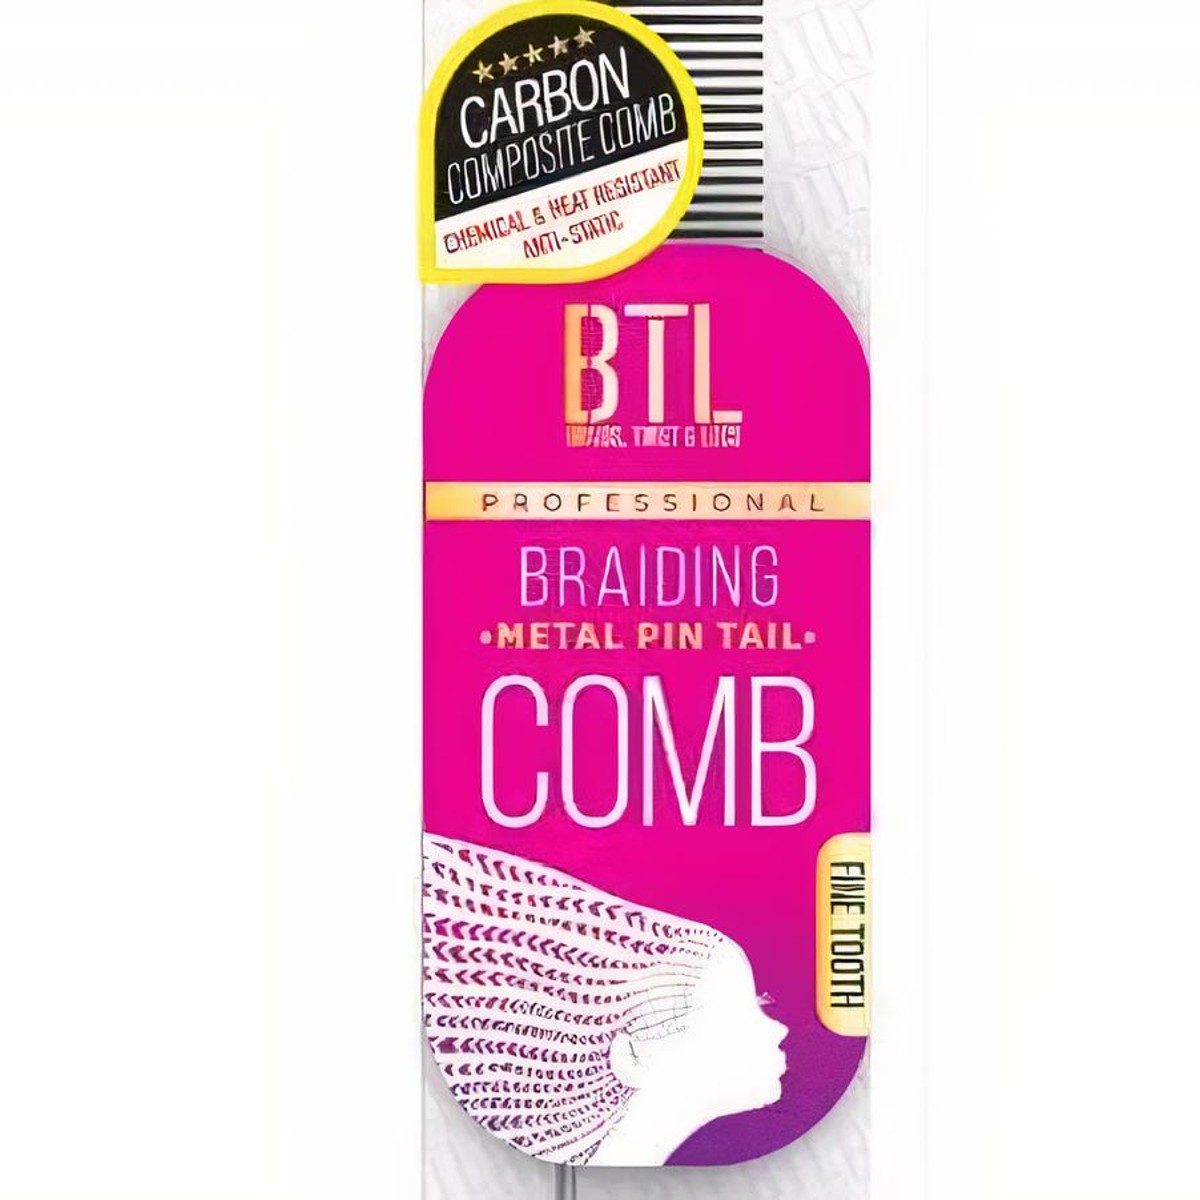 BTL Braiding Metal Pin Tail Styling Comb Chemical and Heat Resistance